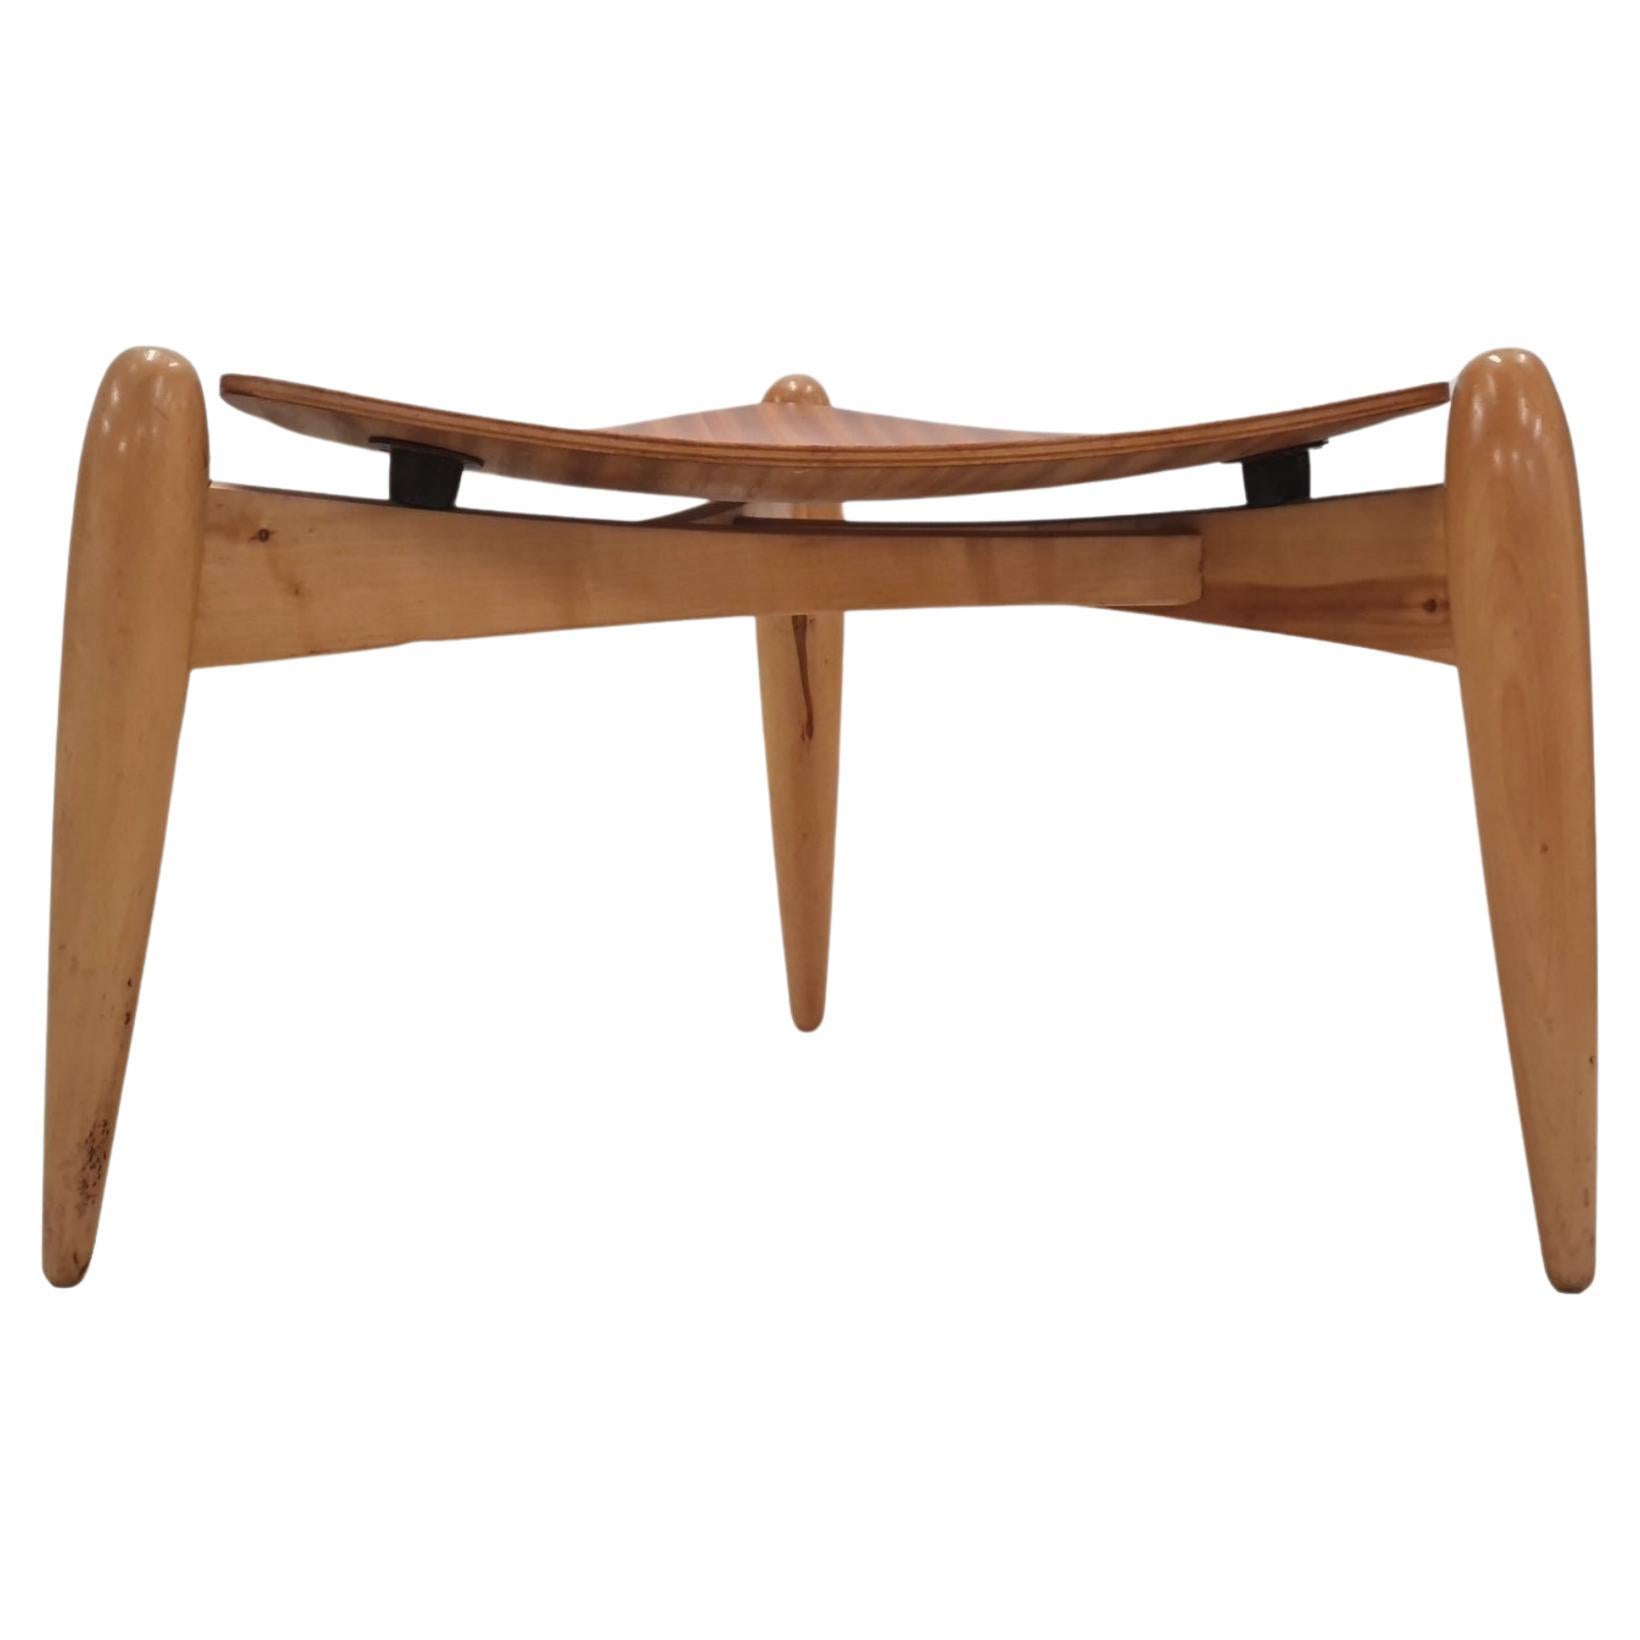 Tale stool with form-pressed plywood seat by Asko Ltd.